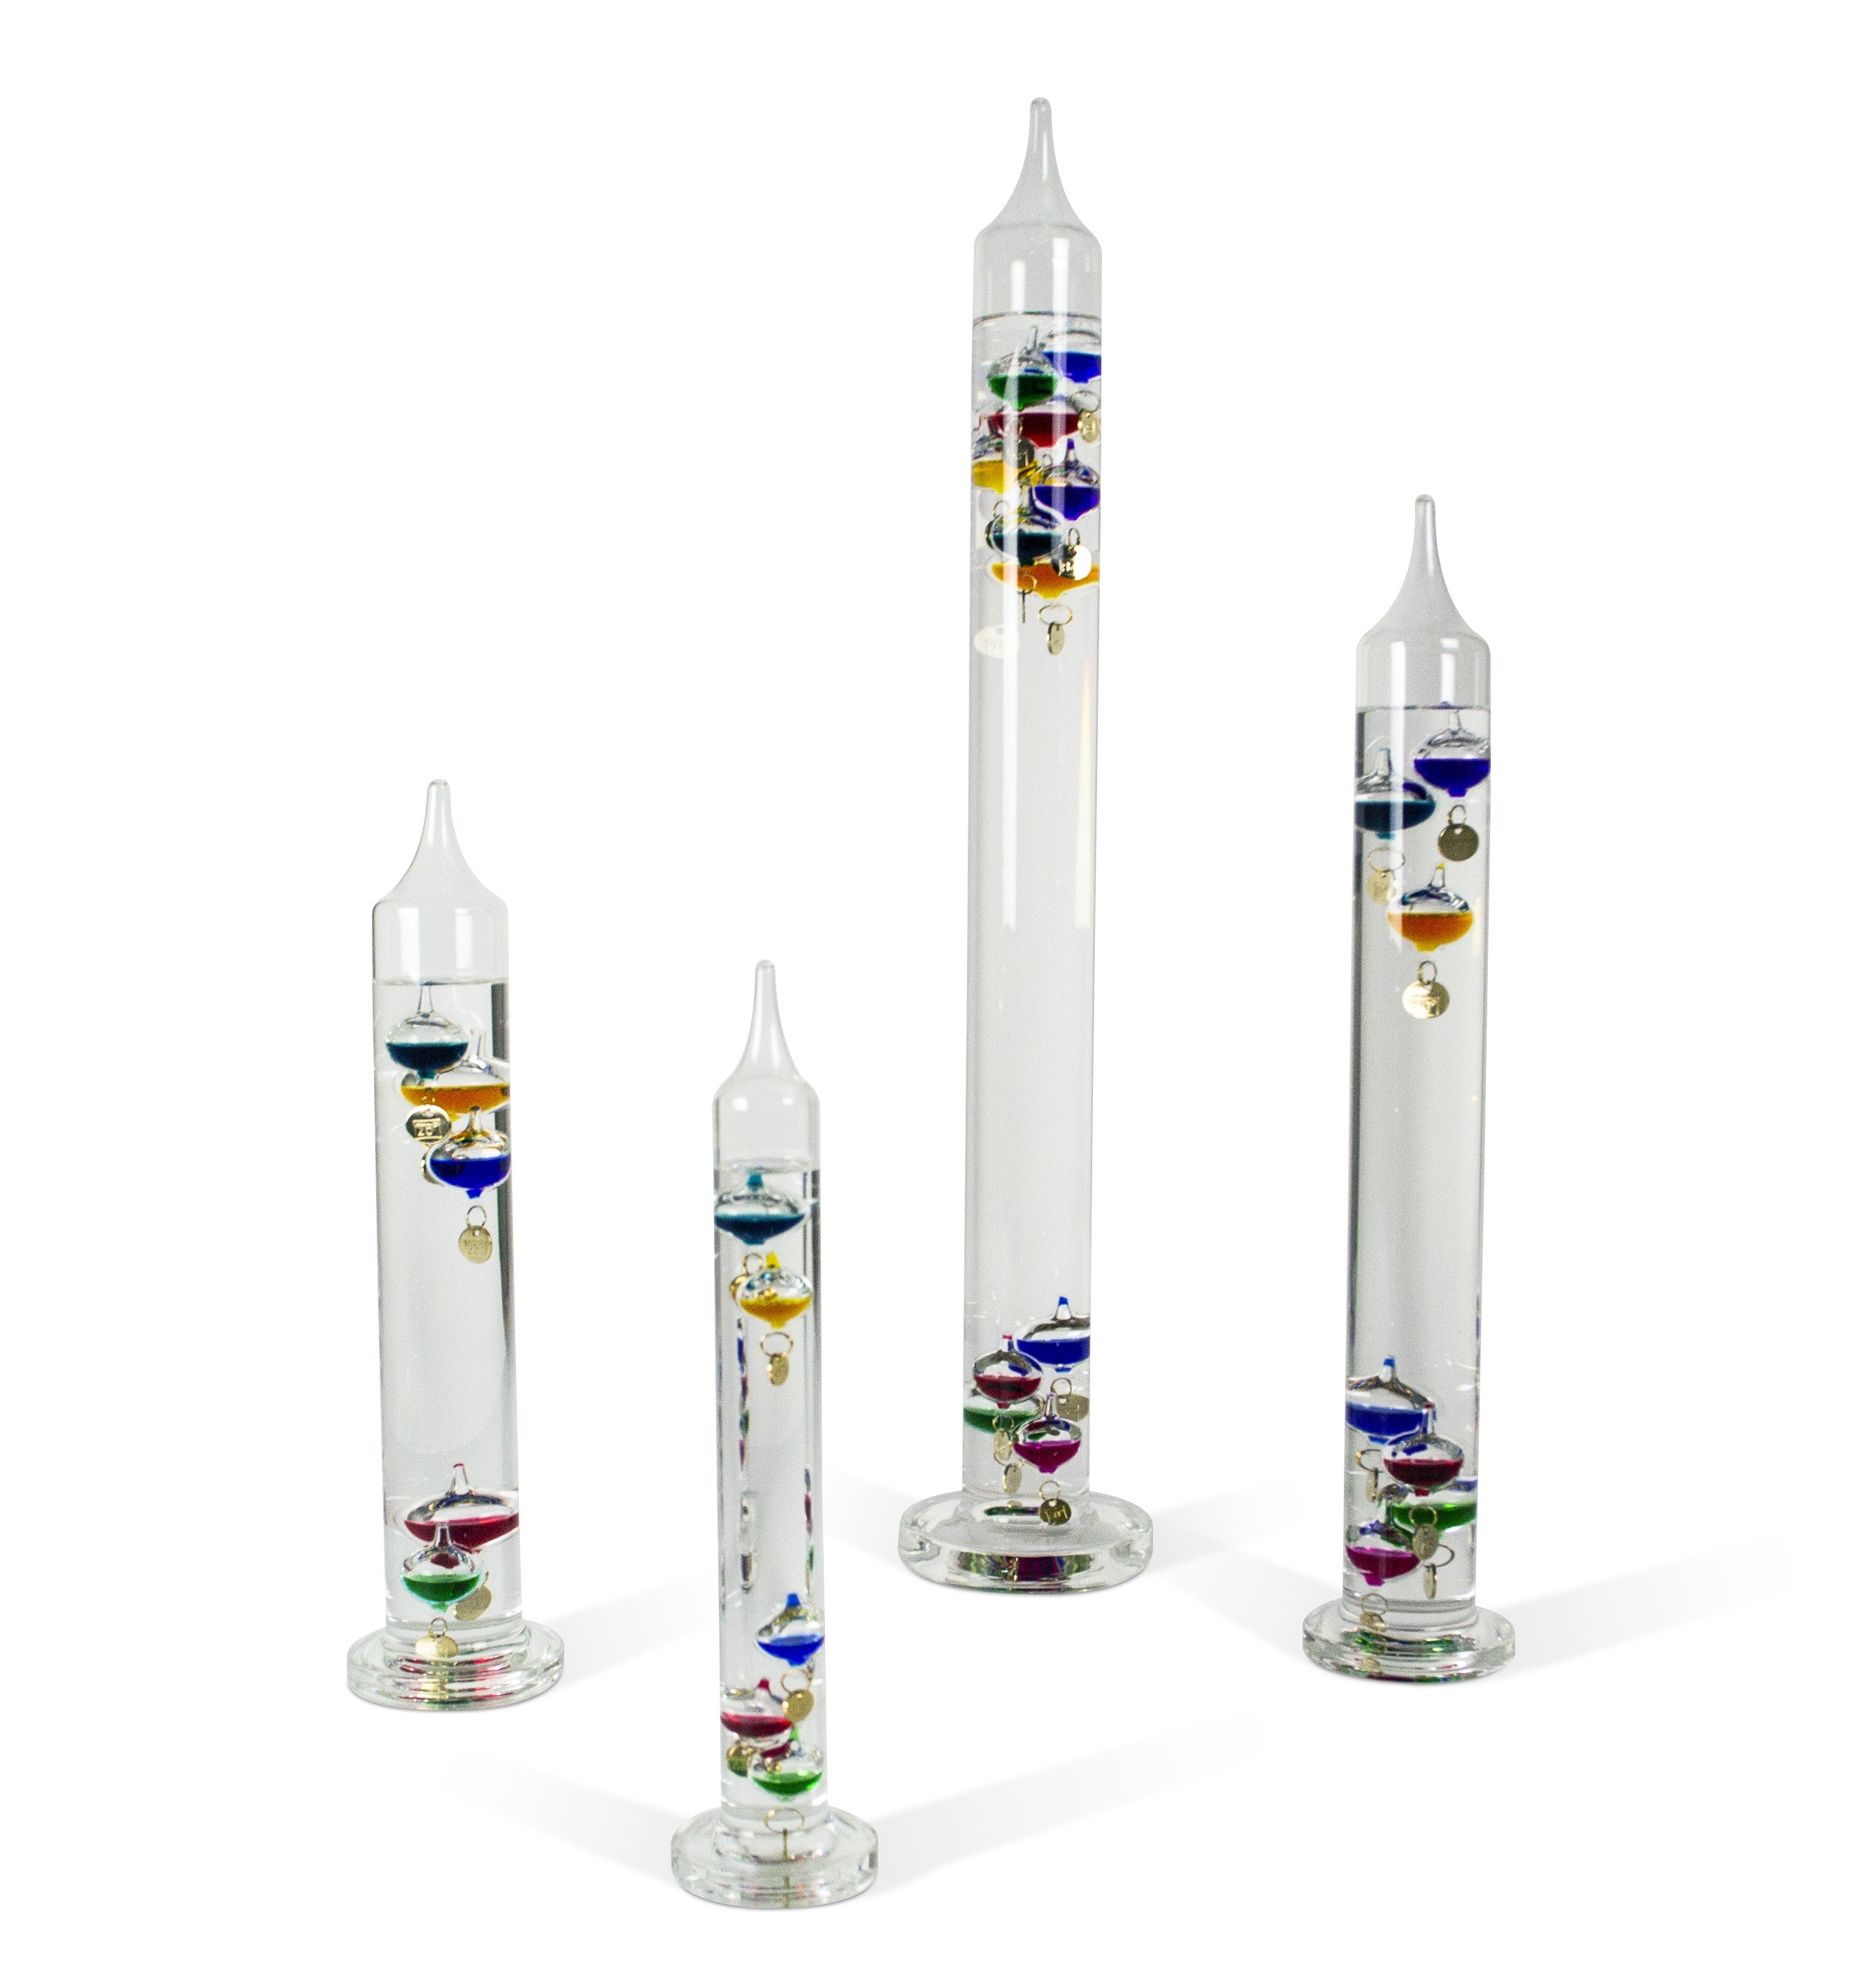 Galileo thermometer stylish accurate temperature gadget xmas gift 37cm 